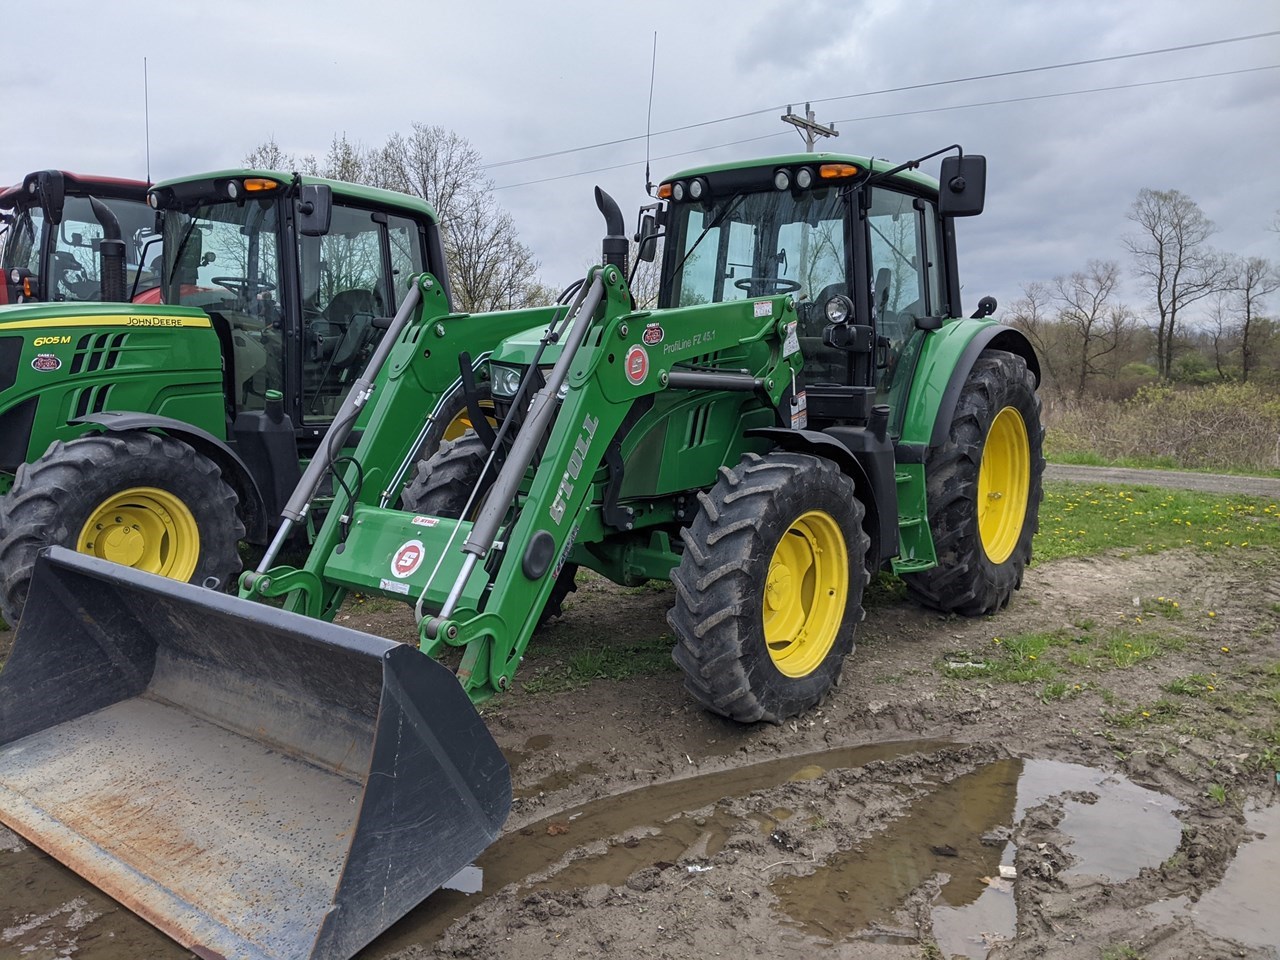 2013 John Deere 6125M Tractor - Utility For Sale